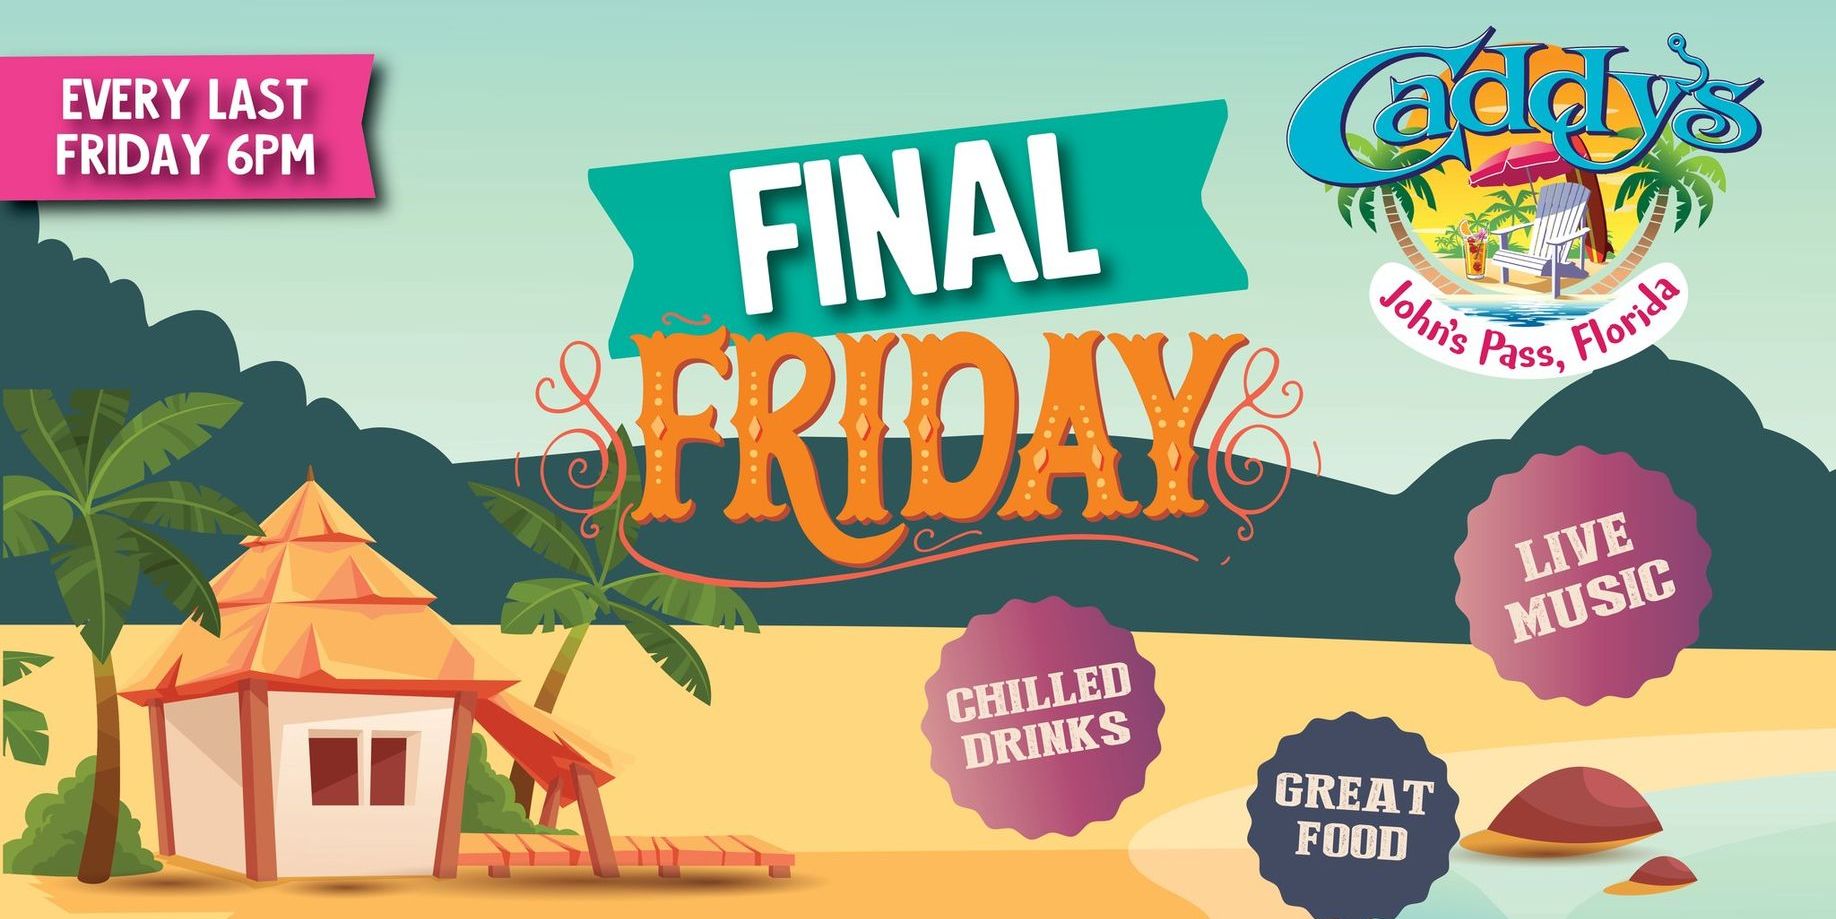 Final Friday promotional image